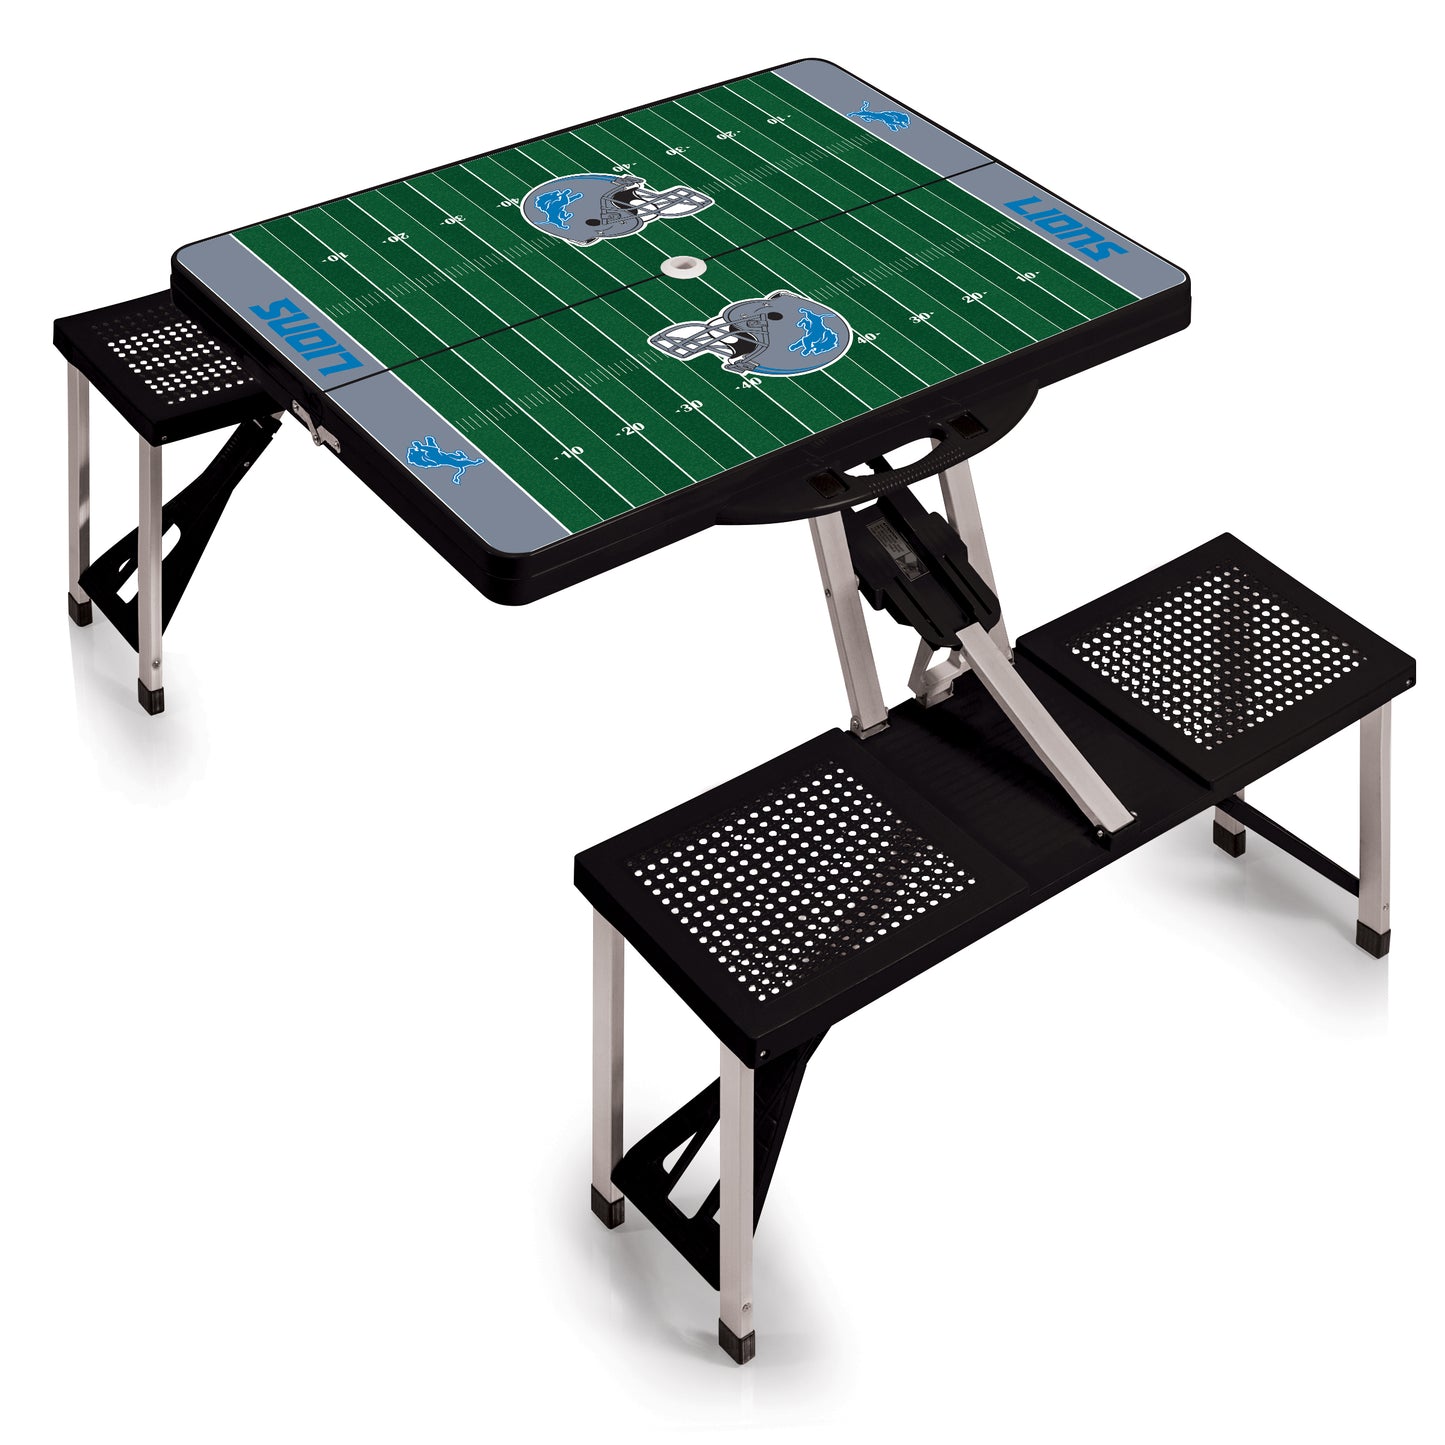 Detroit Lions - Picnic Table Portable Folding Table with Seats and Umbrella